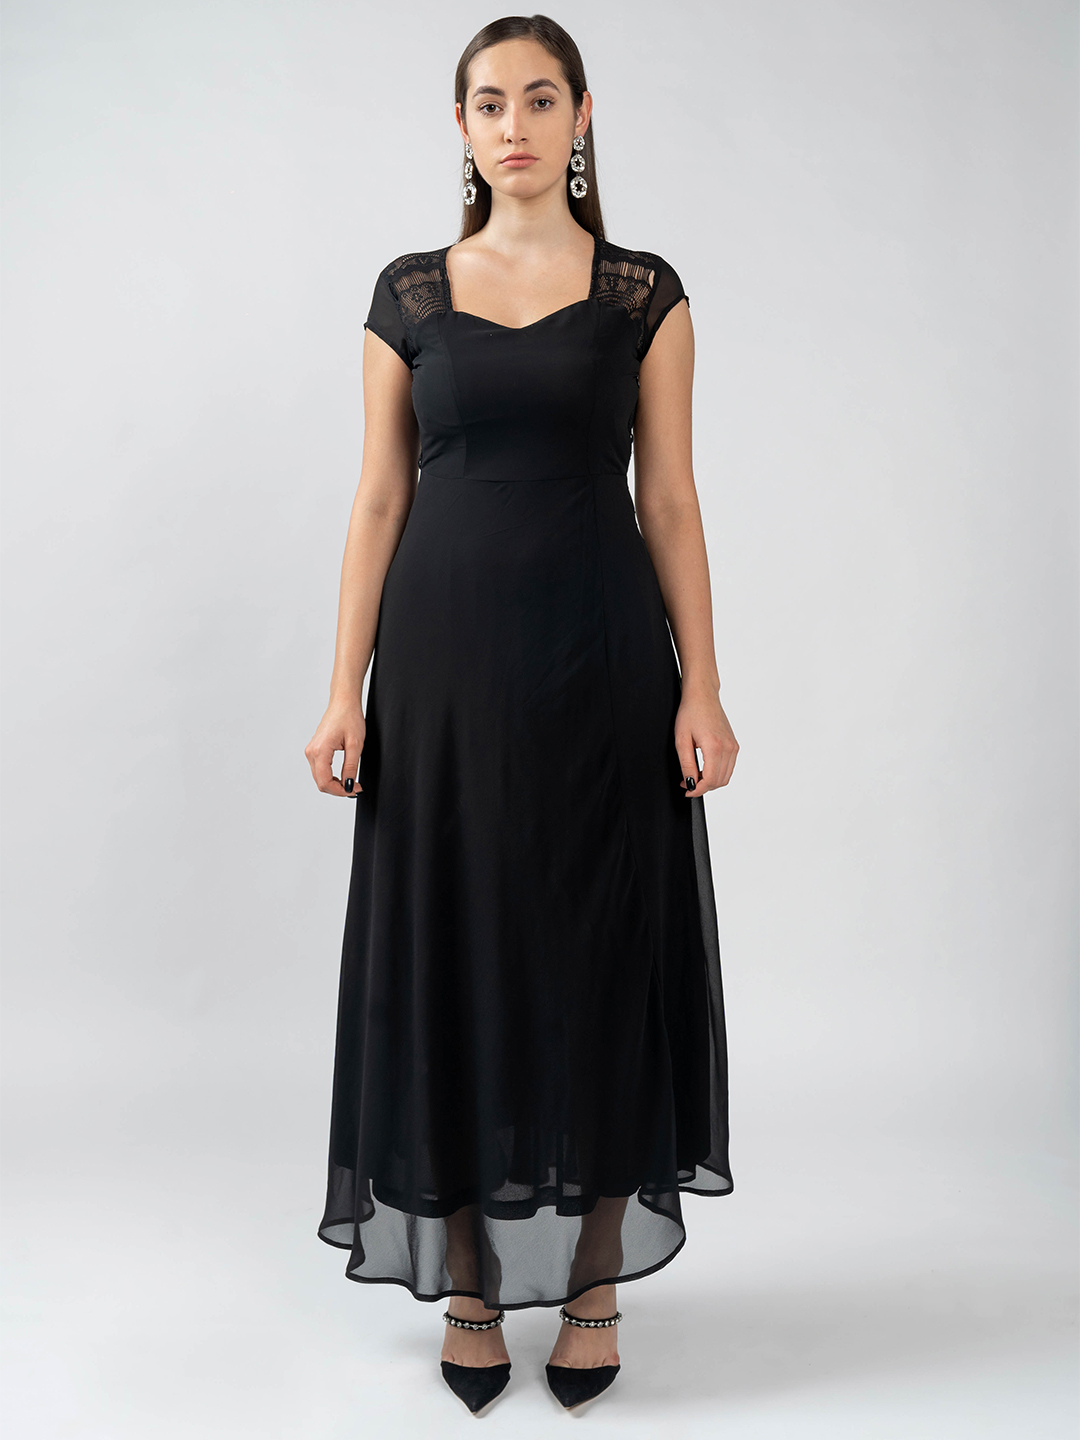 Lace gown dress - Front